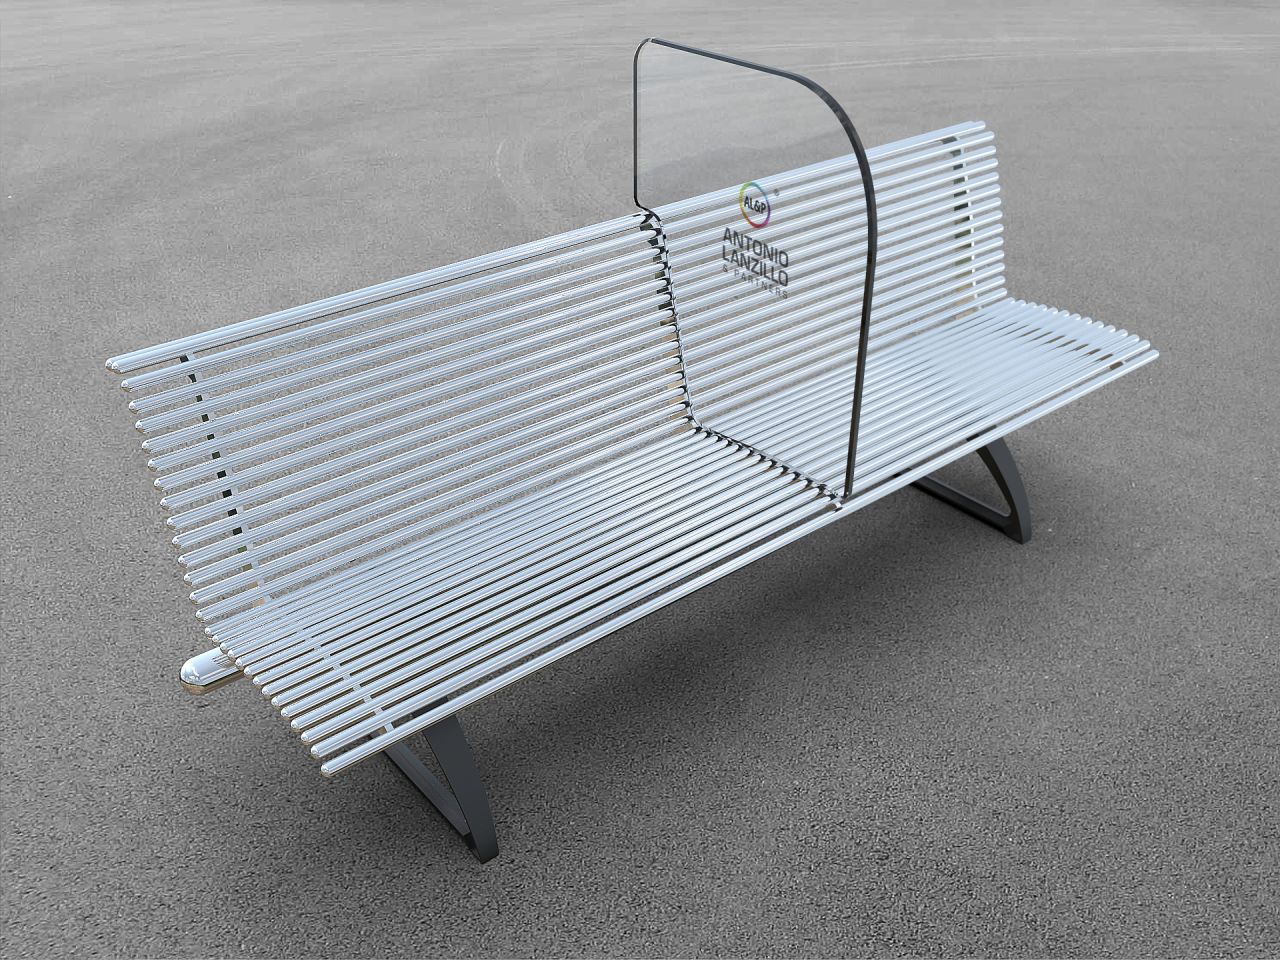 Milan-based architect Antonio Lanzillo has envisaged public benches equipped with acrylic glass "shield" dividers.